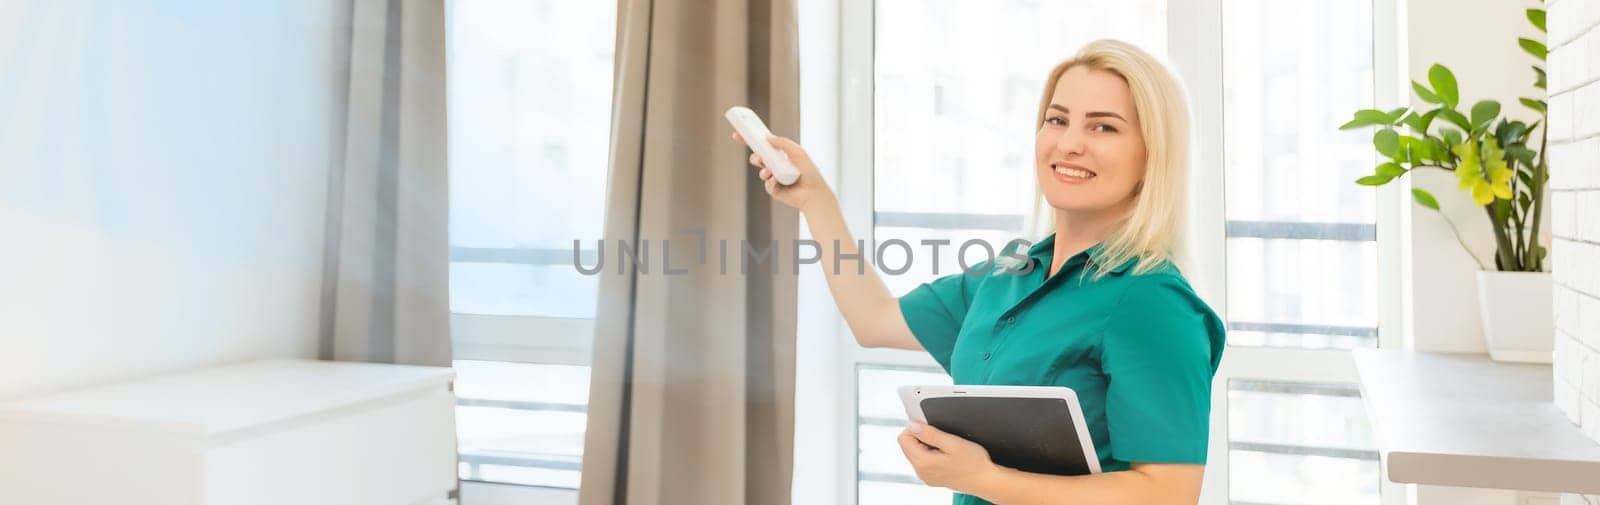 Portrait Of A Happy Woman Holding Remote Control In Front Of Air Conditioner At Home.